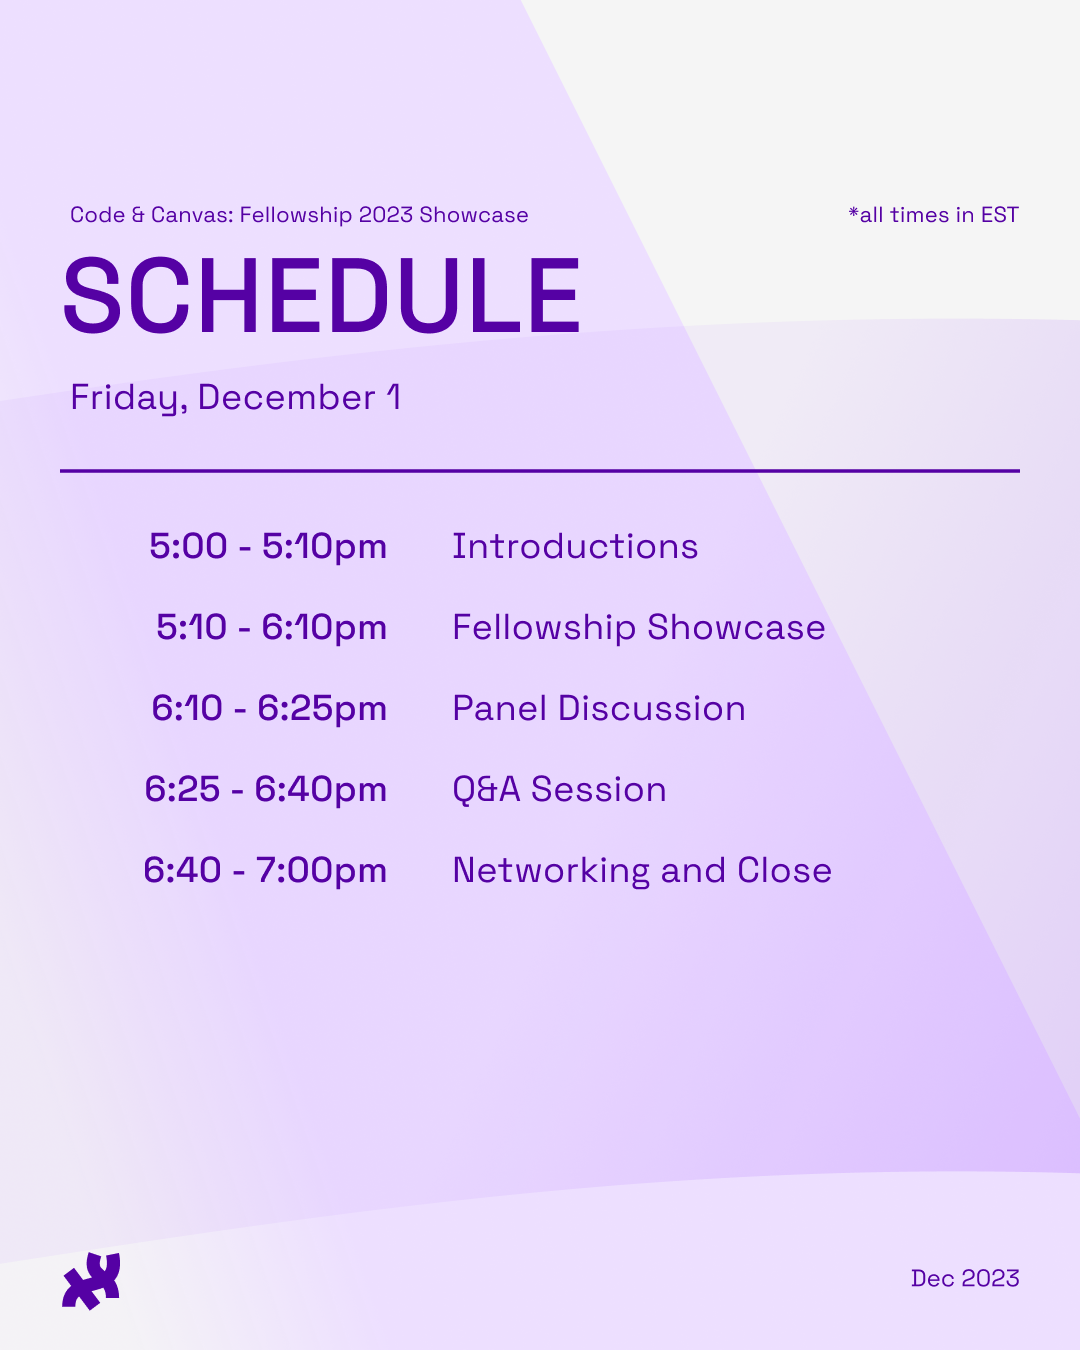 CODE & CANVAS: FELLOWSHIP 2023 SHOWCASE Schedule. Friday December 1, all times in EST. 5-5:10pm Introductions. 5:10-6:10pm Fellowship Showcase. 6:10-6:25pm Panel Discussion. 6:25-6:40pm Q&A Session. 6:40-7pm Networking and Close.